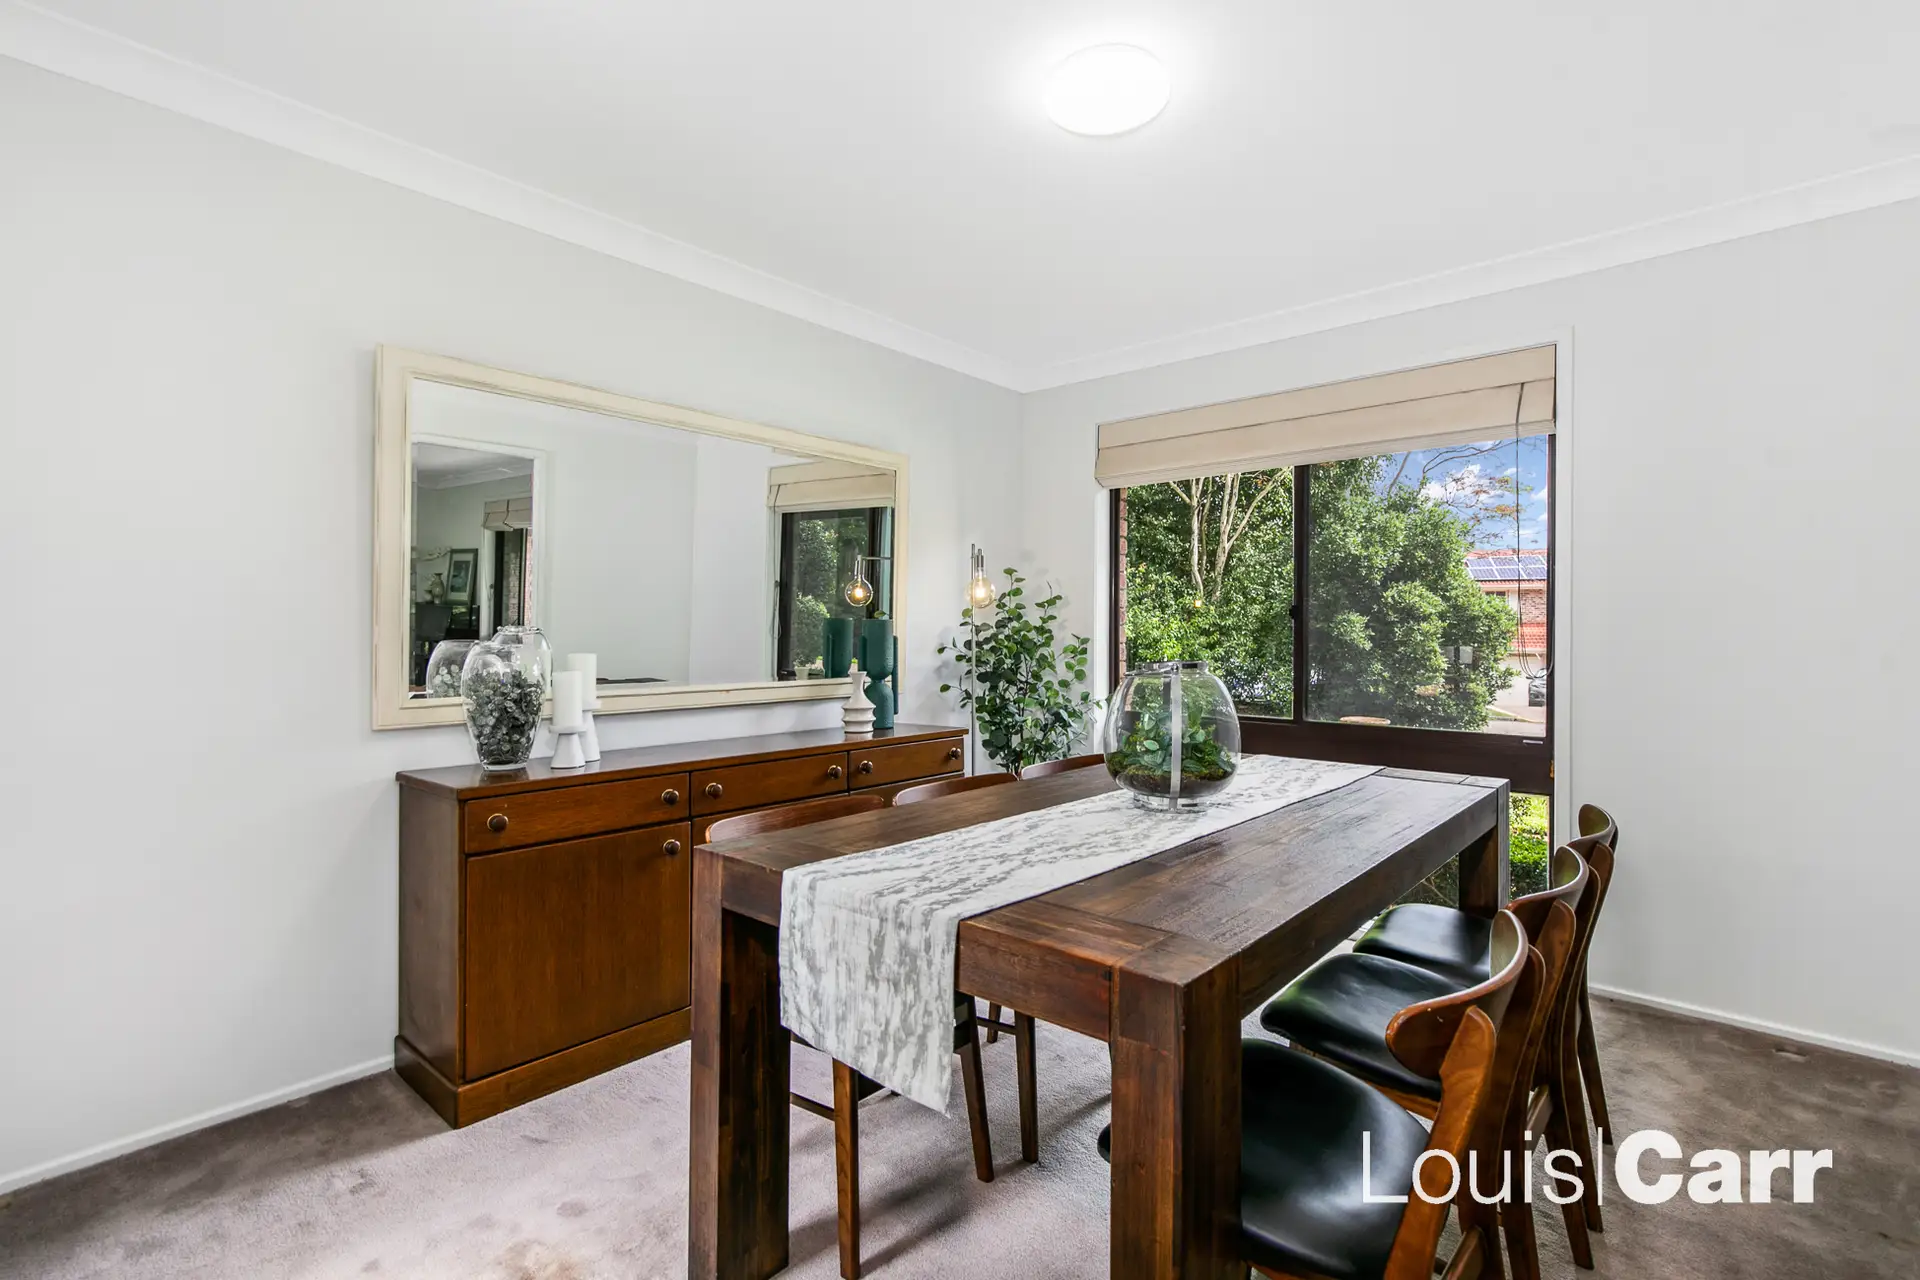 Photo #5: 4 Lorikeet Way, West Pennant Hills - Sold by Louis Carr Real Estate